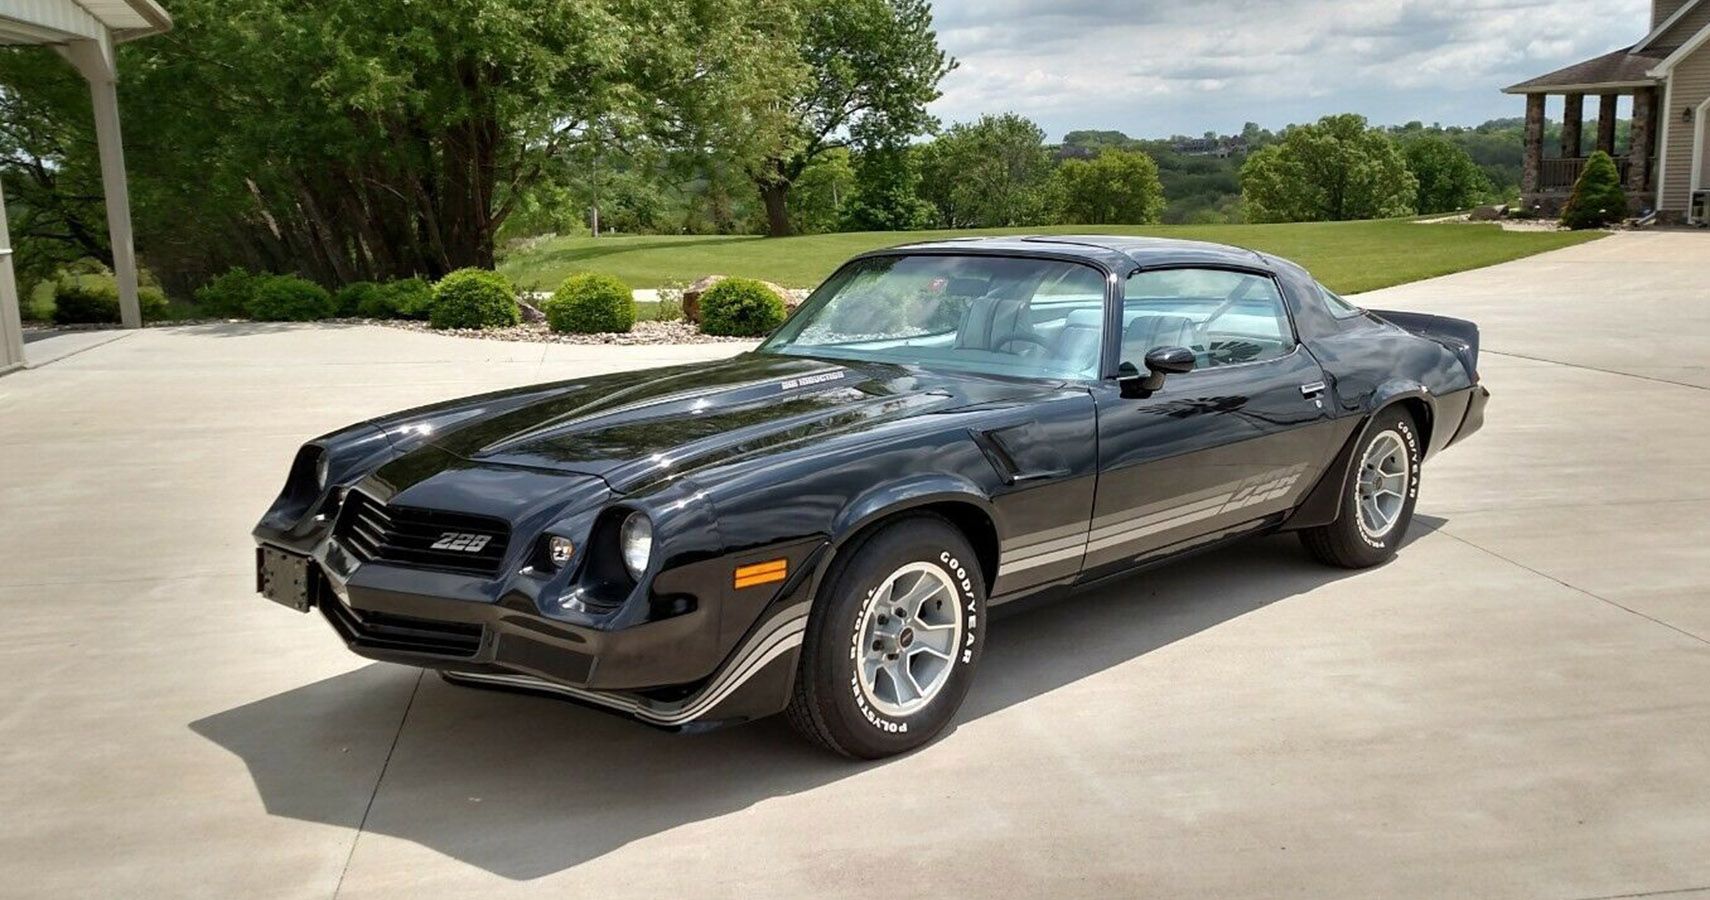 For 1981, The Chevy Camaro Z28 Sports Coupe Was A Two-Door Coupe, With A Naturally Aspirated 5.7-Liter V8